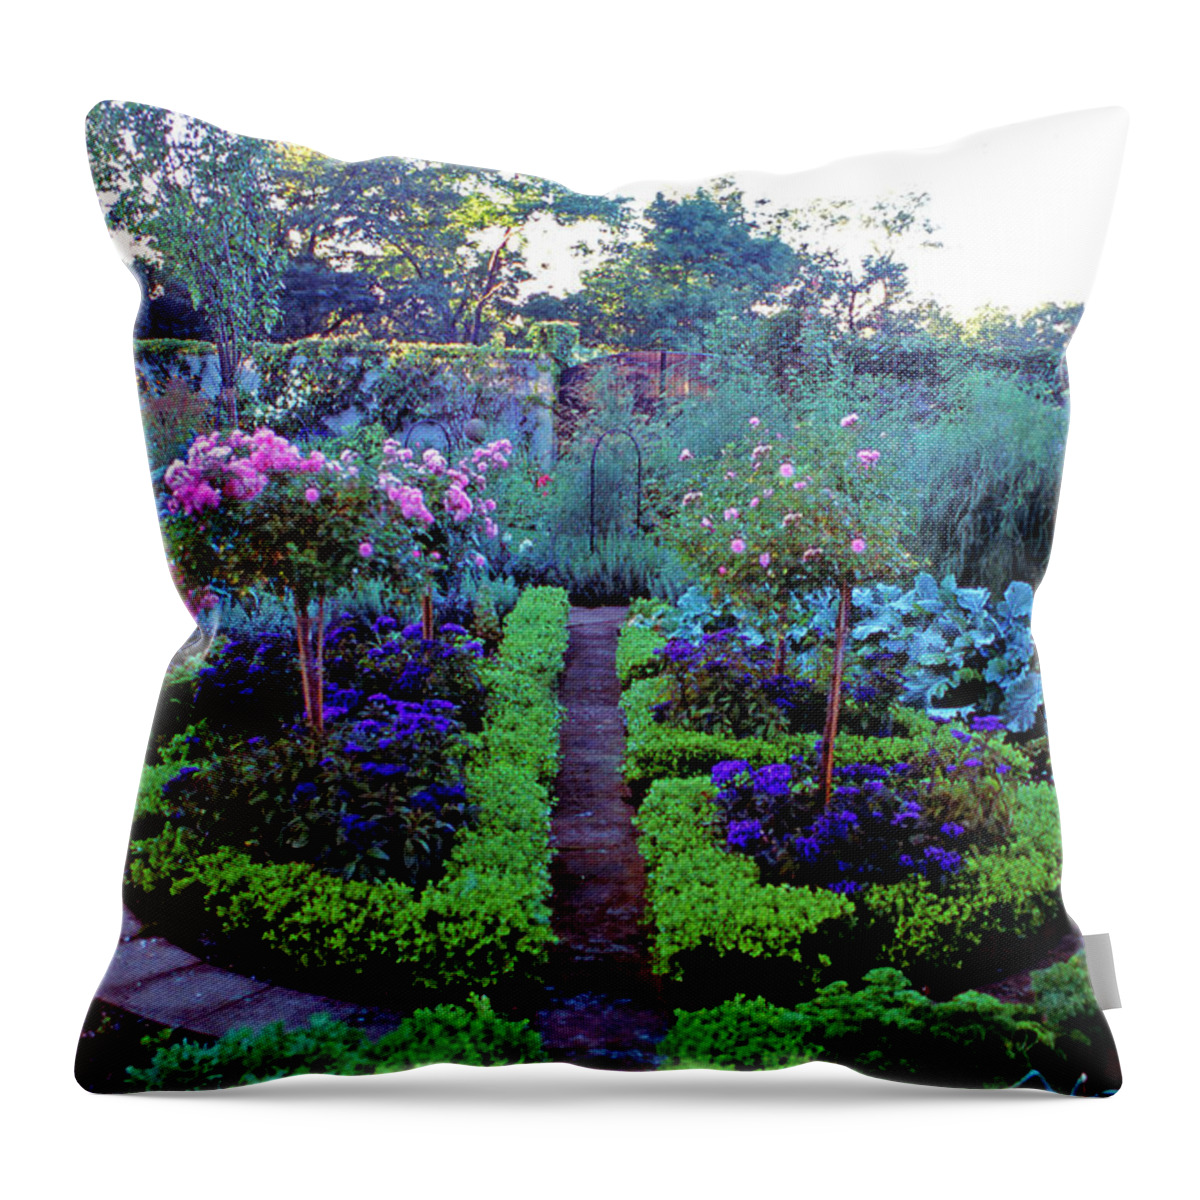 Tranquility Throw Pillow featuring the photograph Walled Garden by Richard Felber